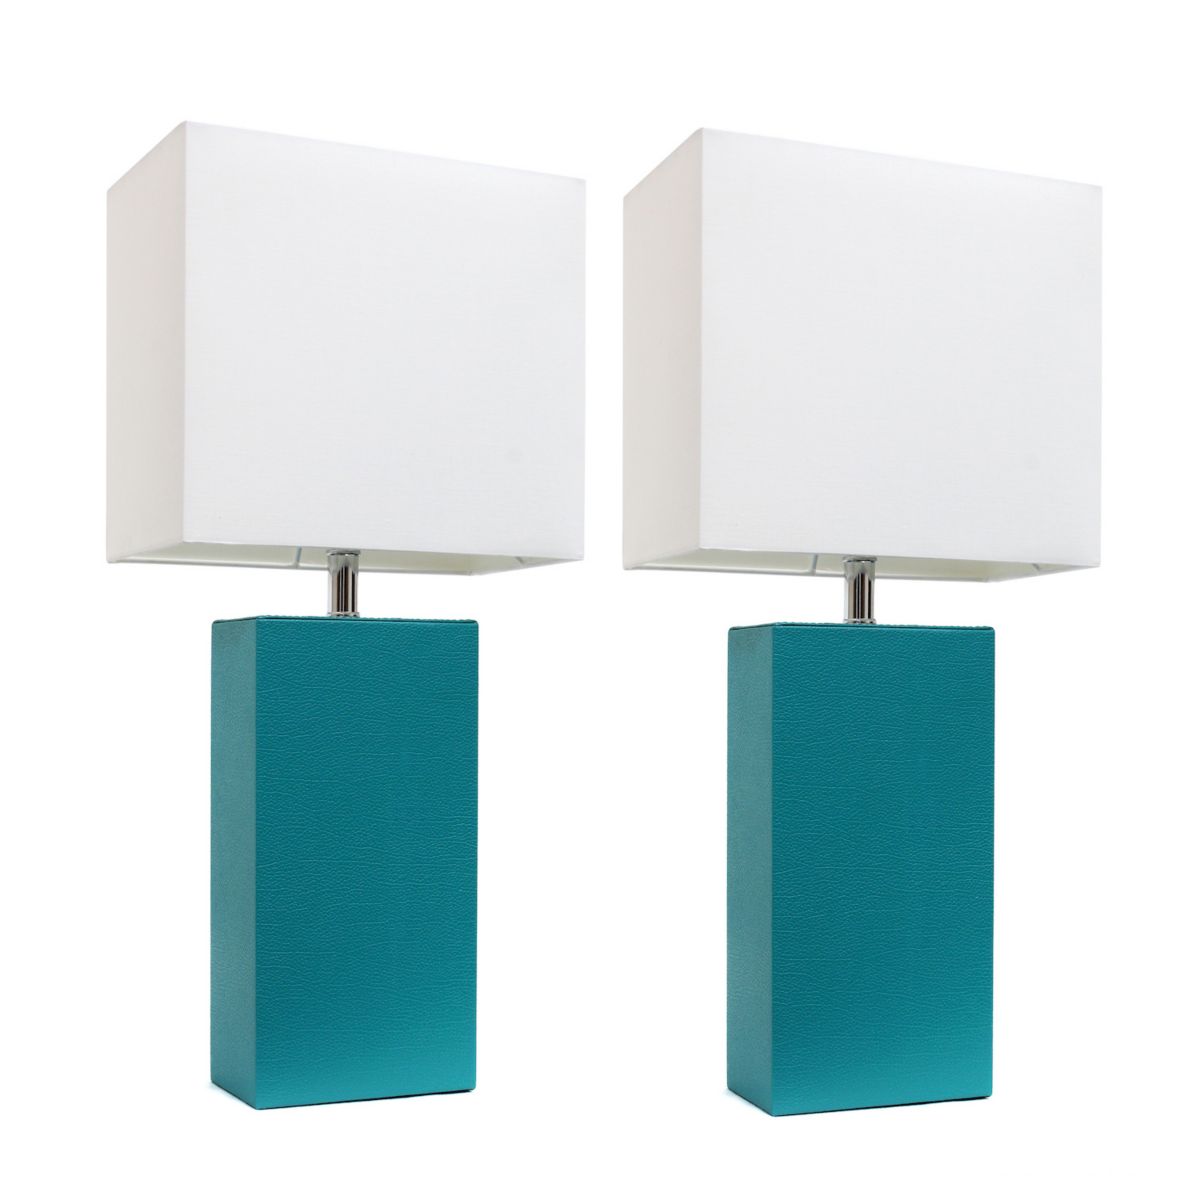 Elegant Designs 2 Pack Modern Leather Table Lamps with Fabric Shades Elegant Designs